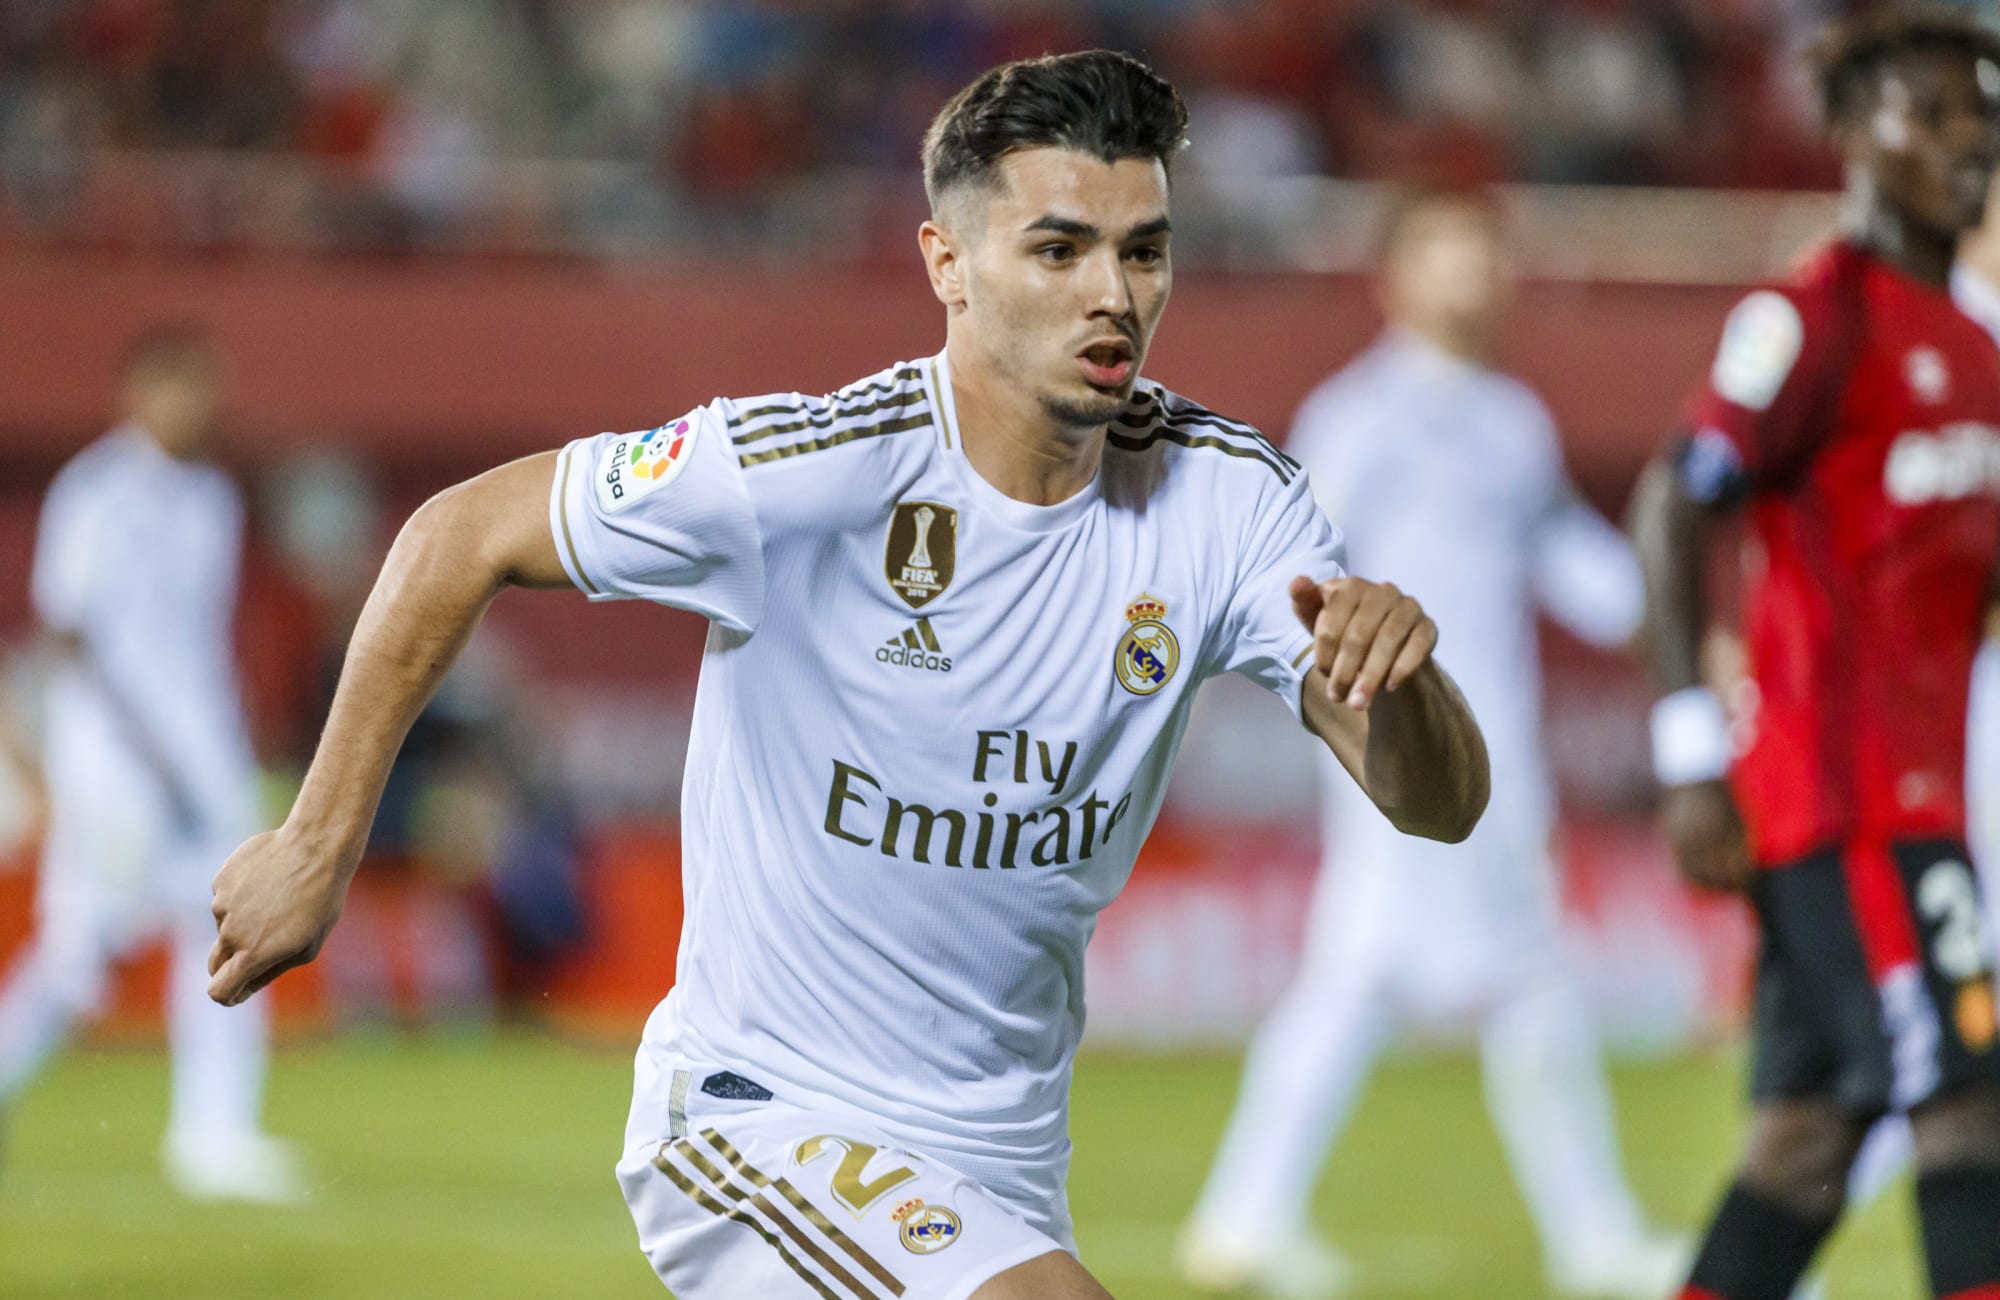 Real Madrid Brahim Diaz could get a Europa League shot next year